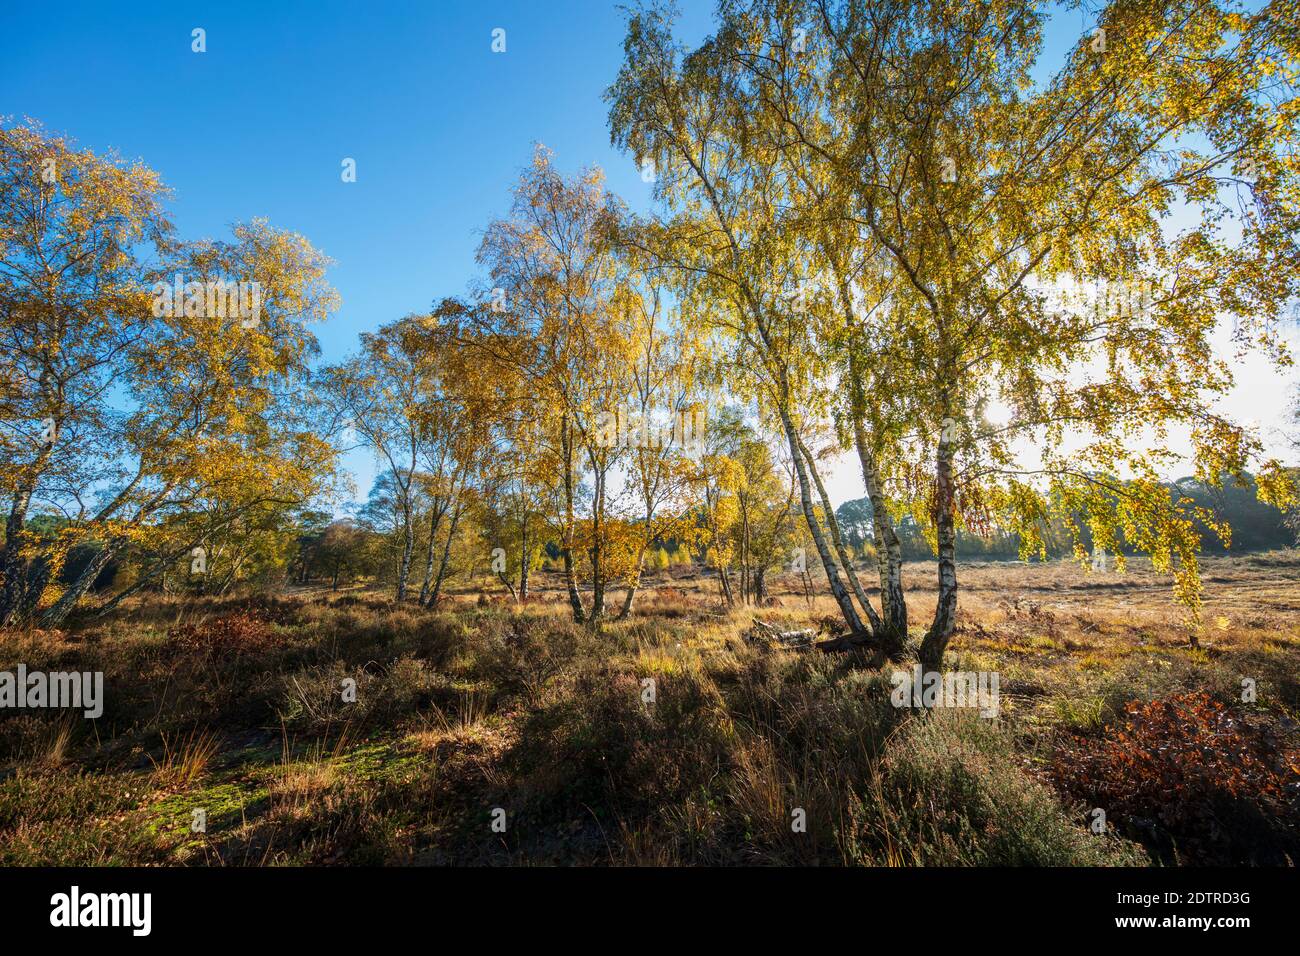 Silver Birchtrees on Newtown Common heathland with autumn leaves, Newtown Common, Burghclere, Hampshire, England, United Kingdom, Europe Stock Photo